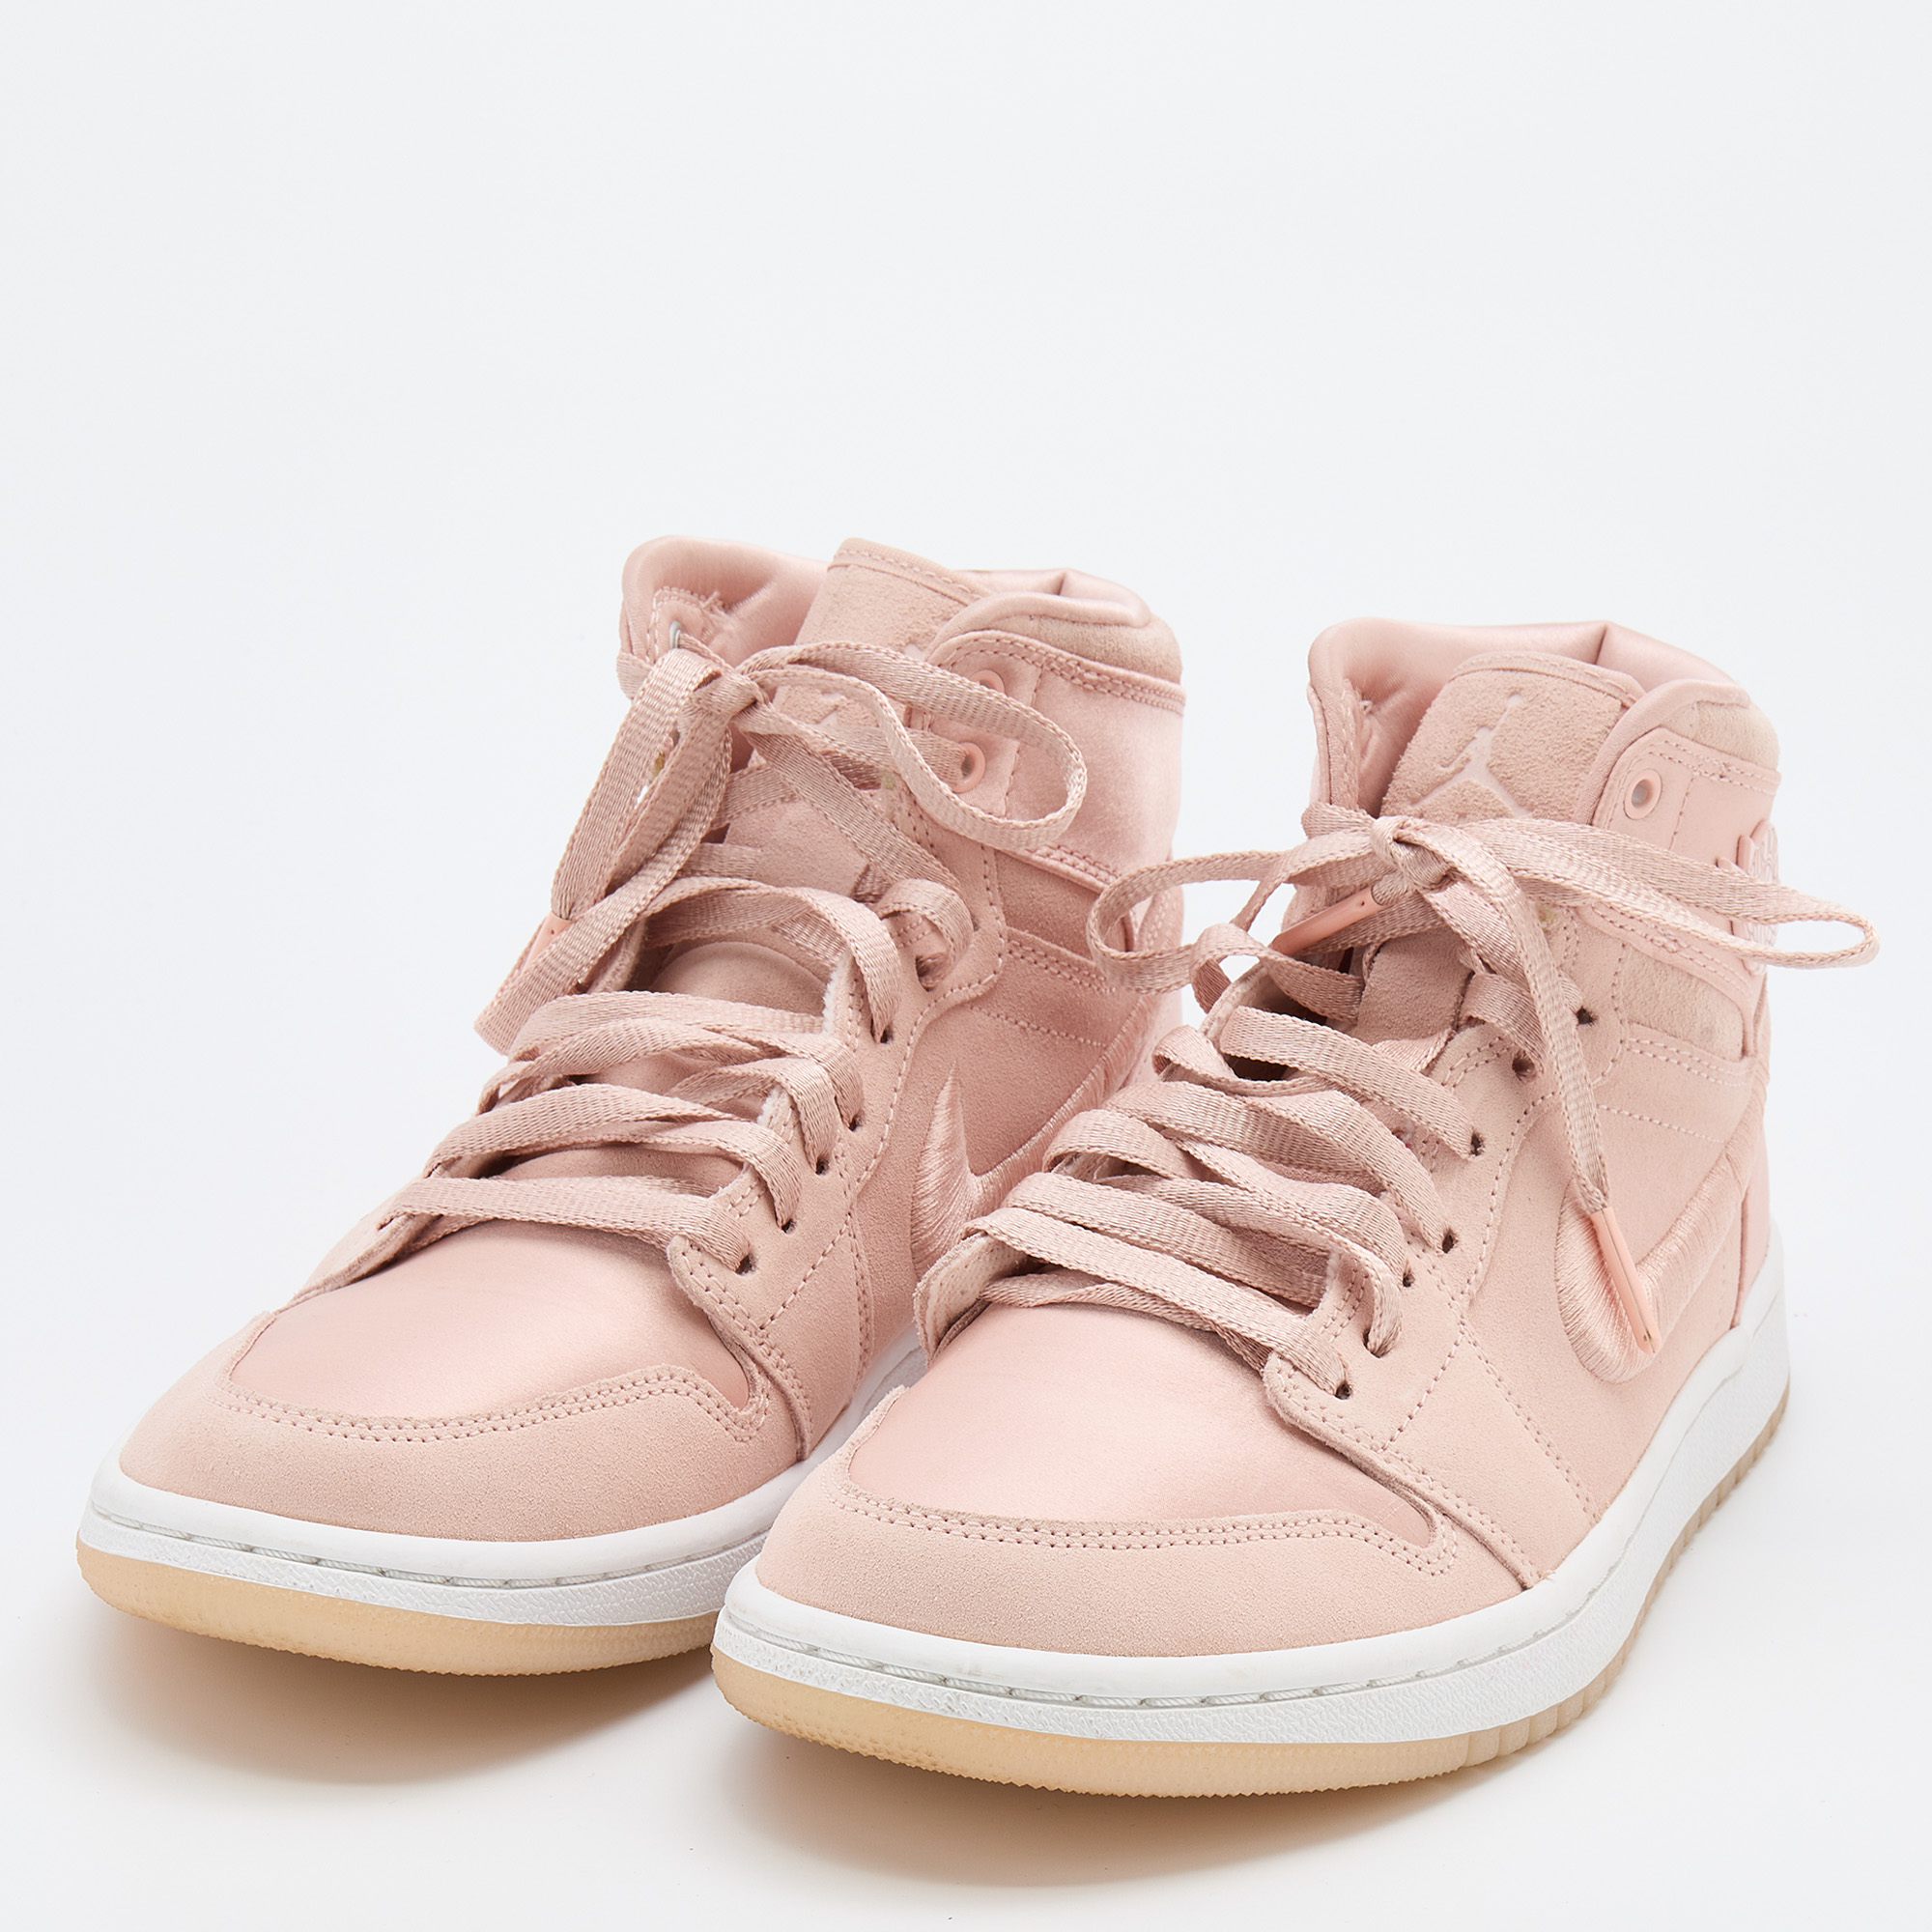 

Air Jordan Light Pink Satin and Suede 1 Retro High Season of Her Sunset Tint High Top Sneakers Size